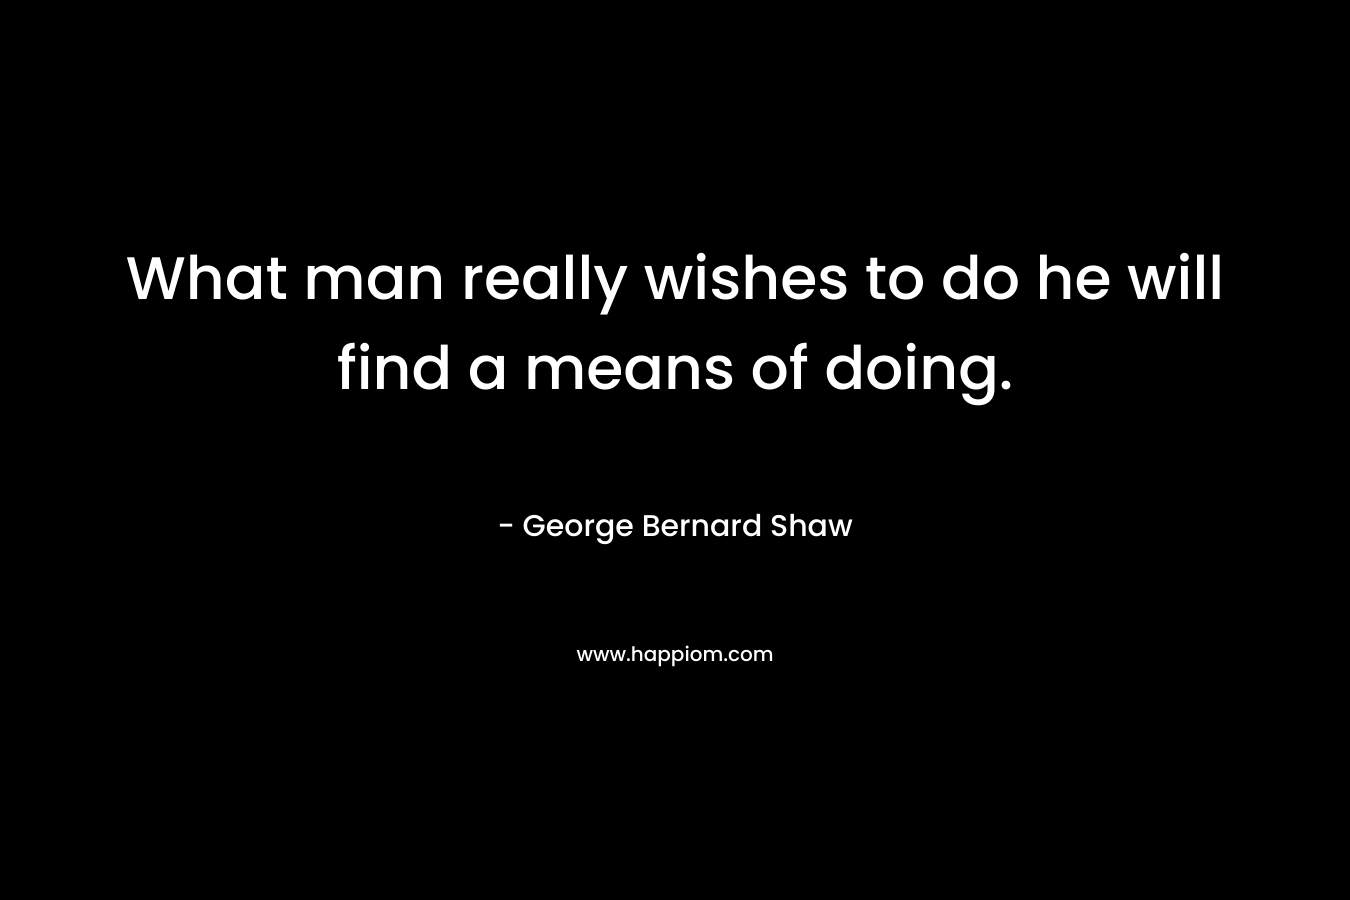 What man really wishes to do he will find a means of doing.